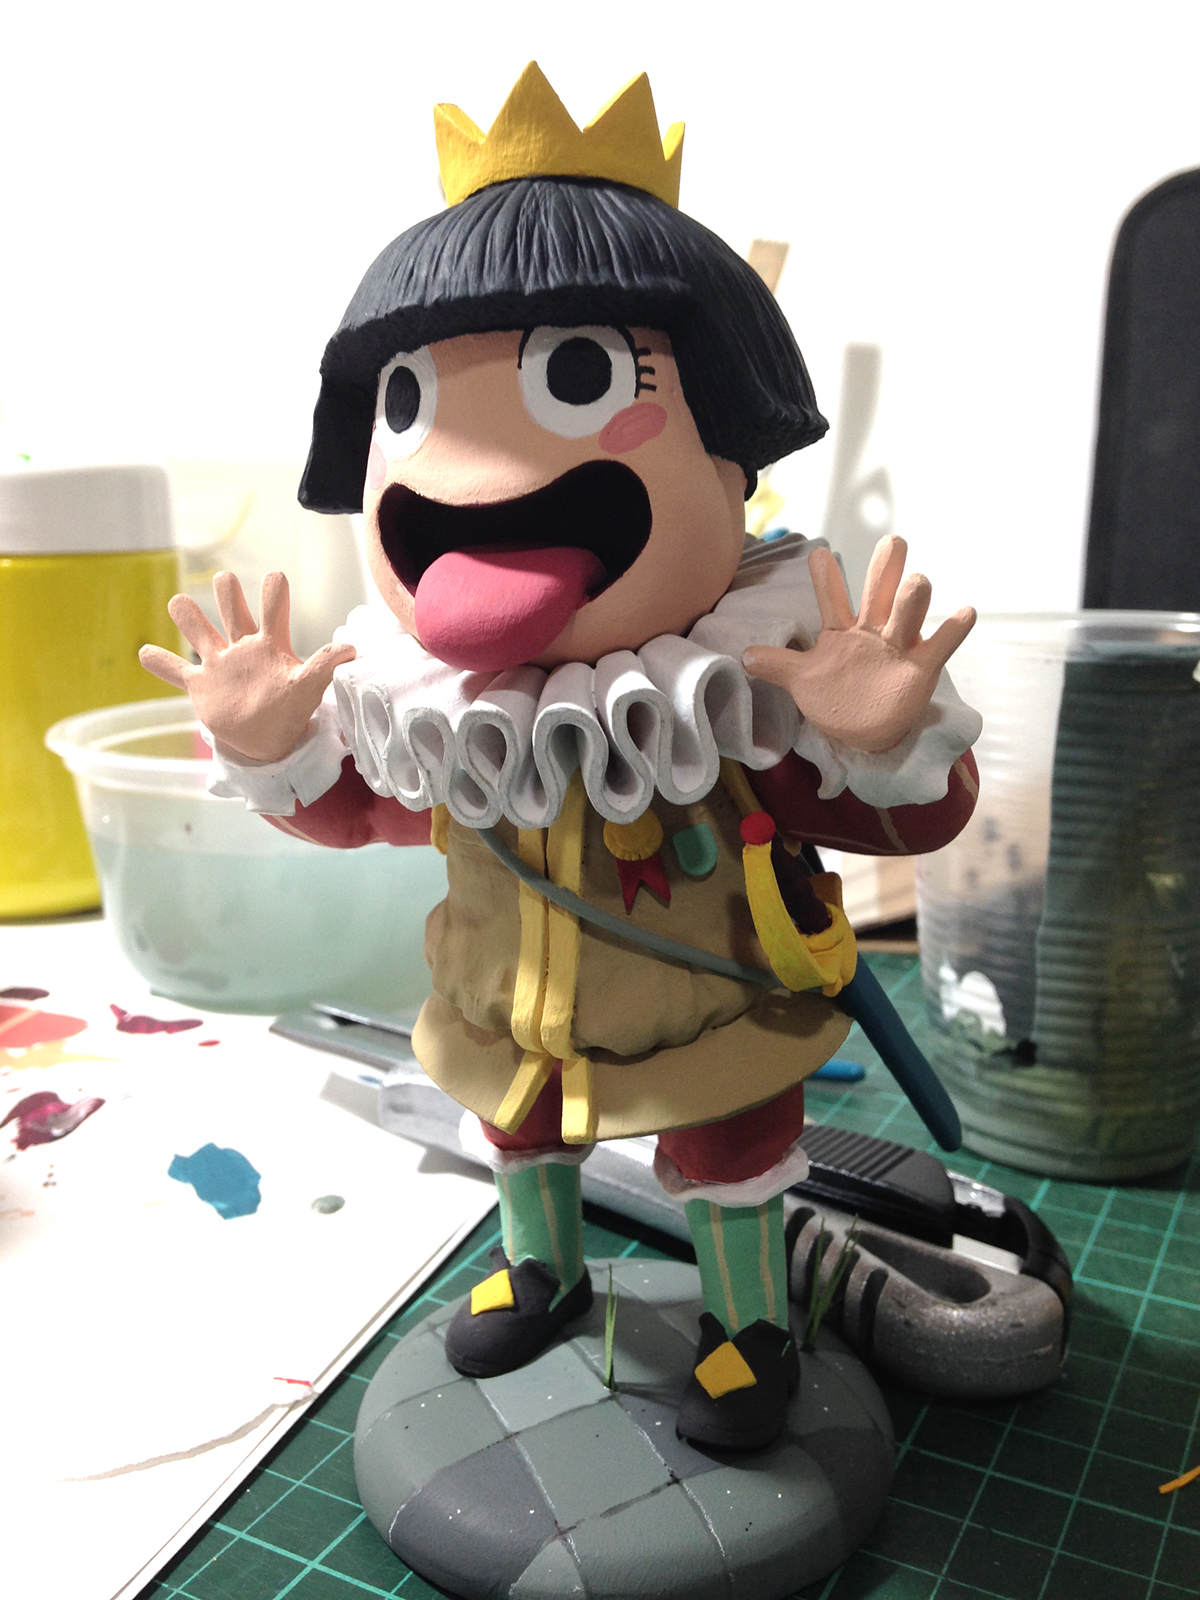 count conde king Little King ERR Erred mistaken mad king toys juguetes clay model clay sculpey